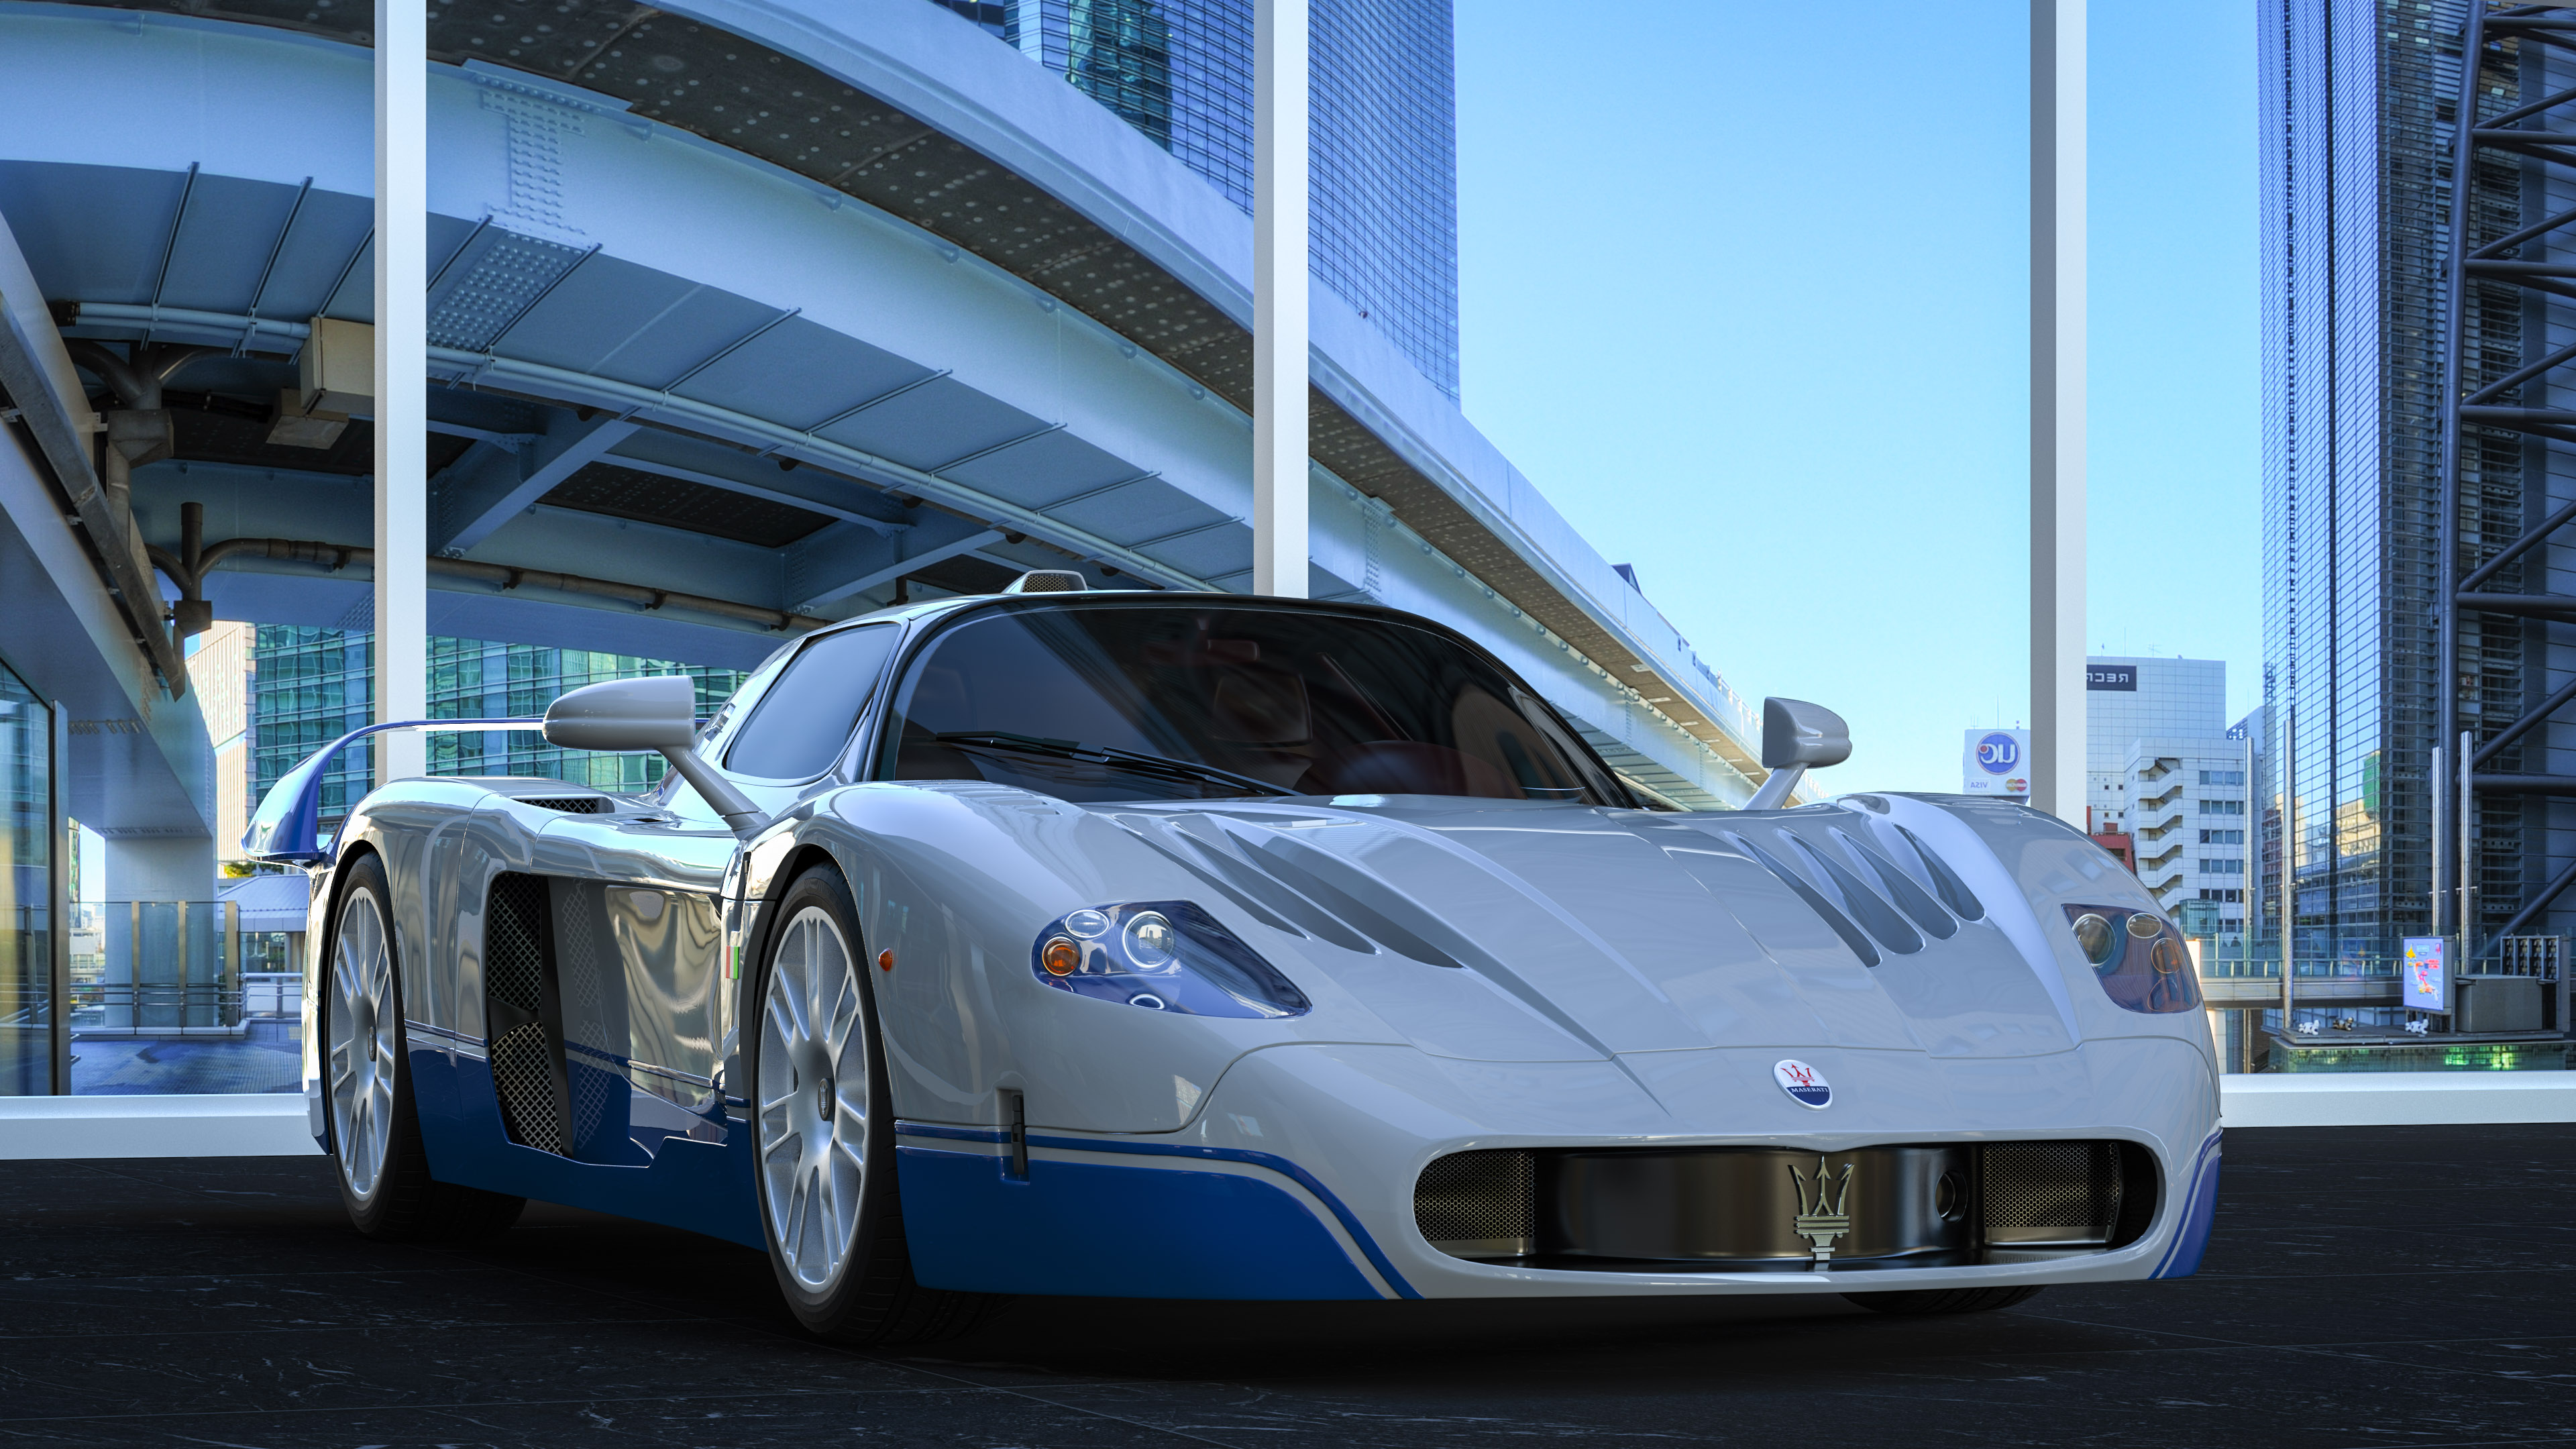 Among our top car wallpapers, the Maserati MC12 stands out, a testament to elegance and speed, perfect for those who appreciate the finer things in automotive design.